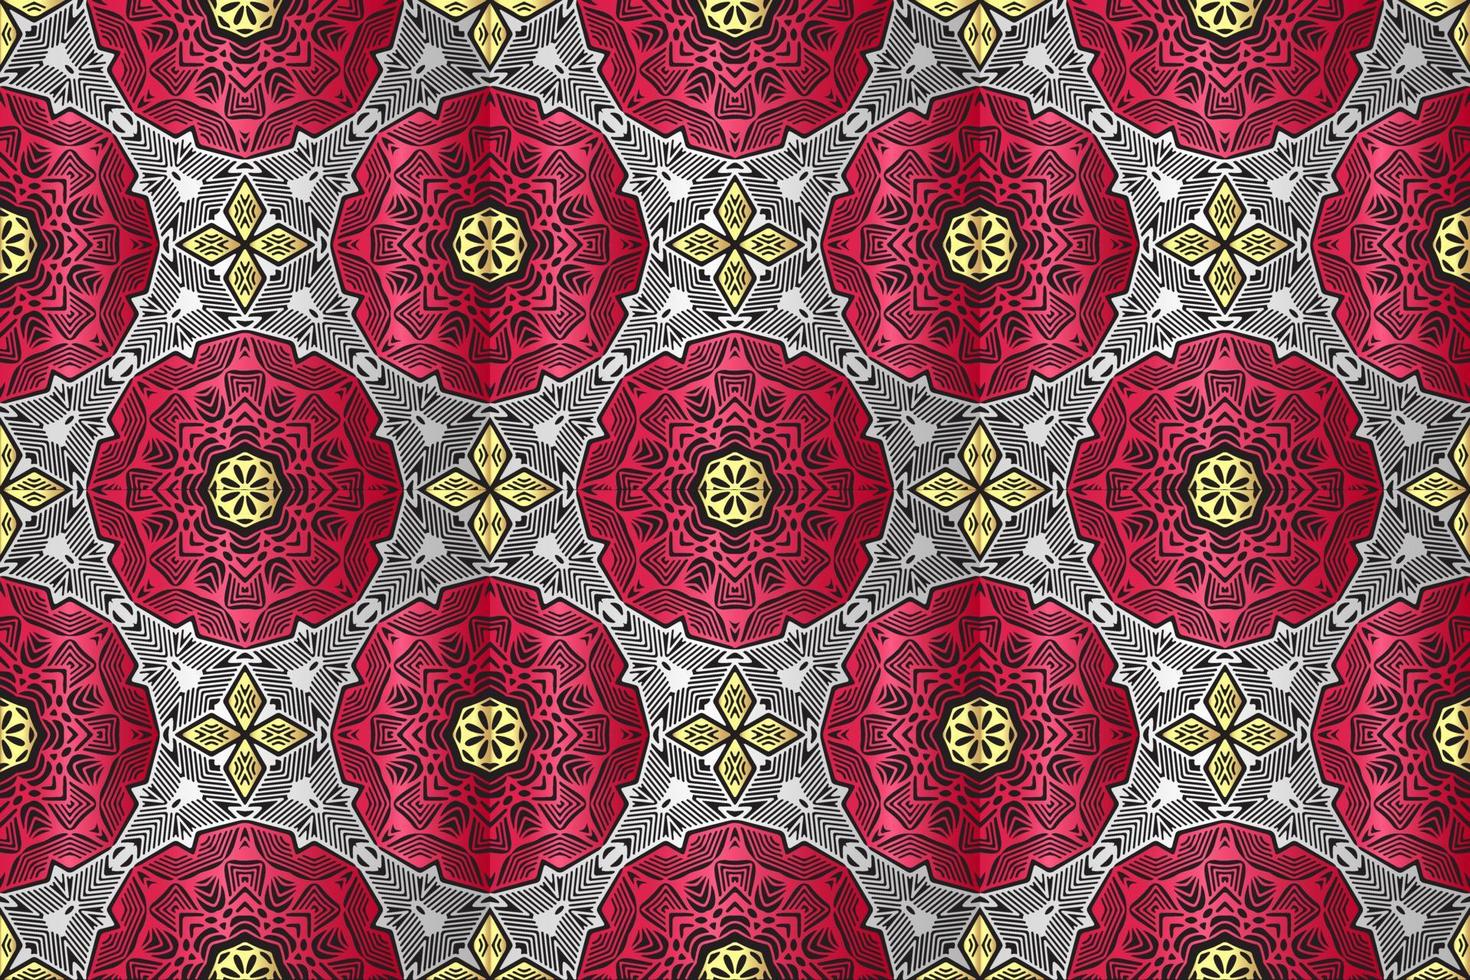 abstract grunge pattern with metal colour vector